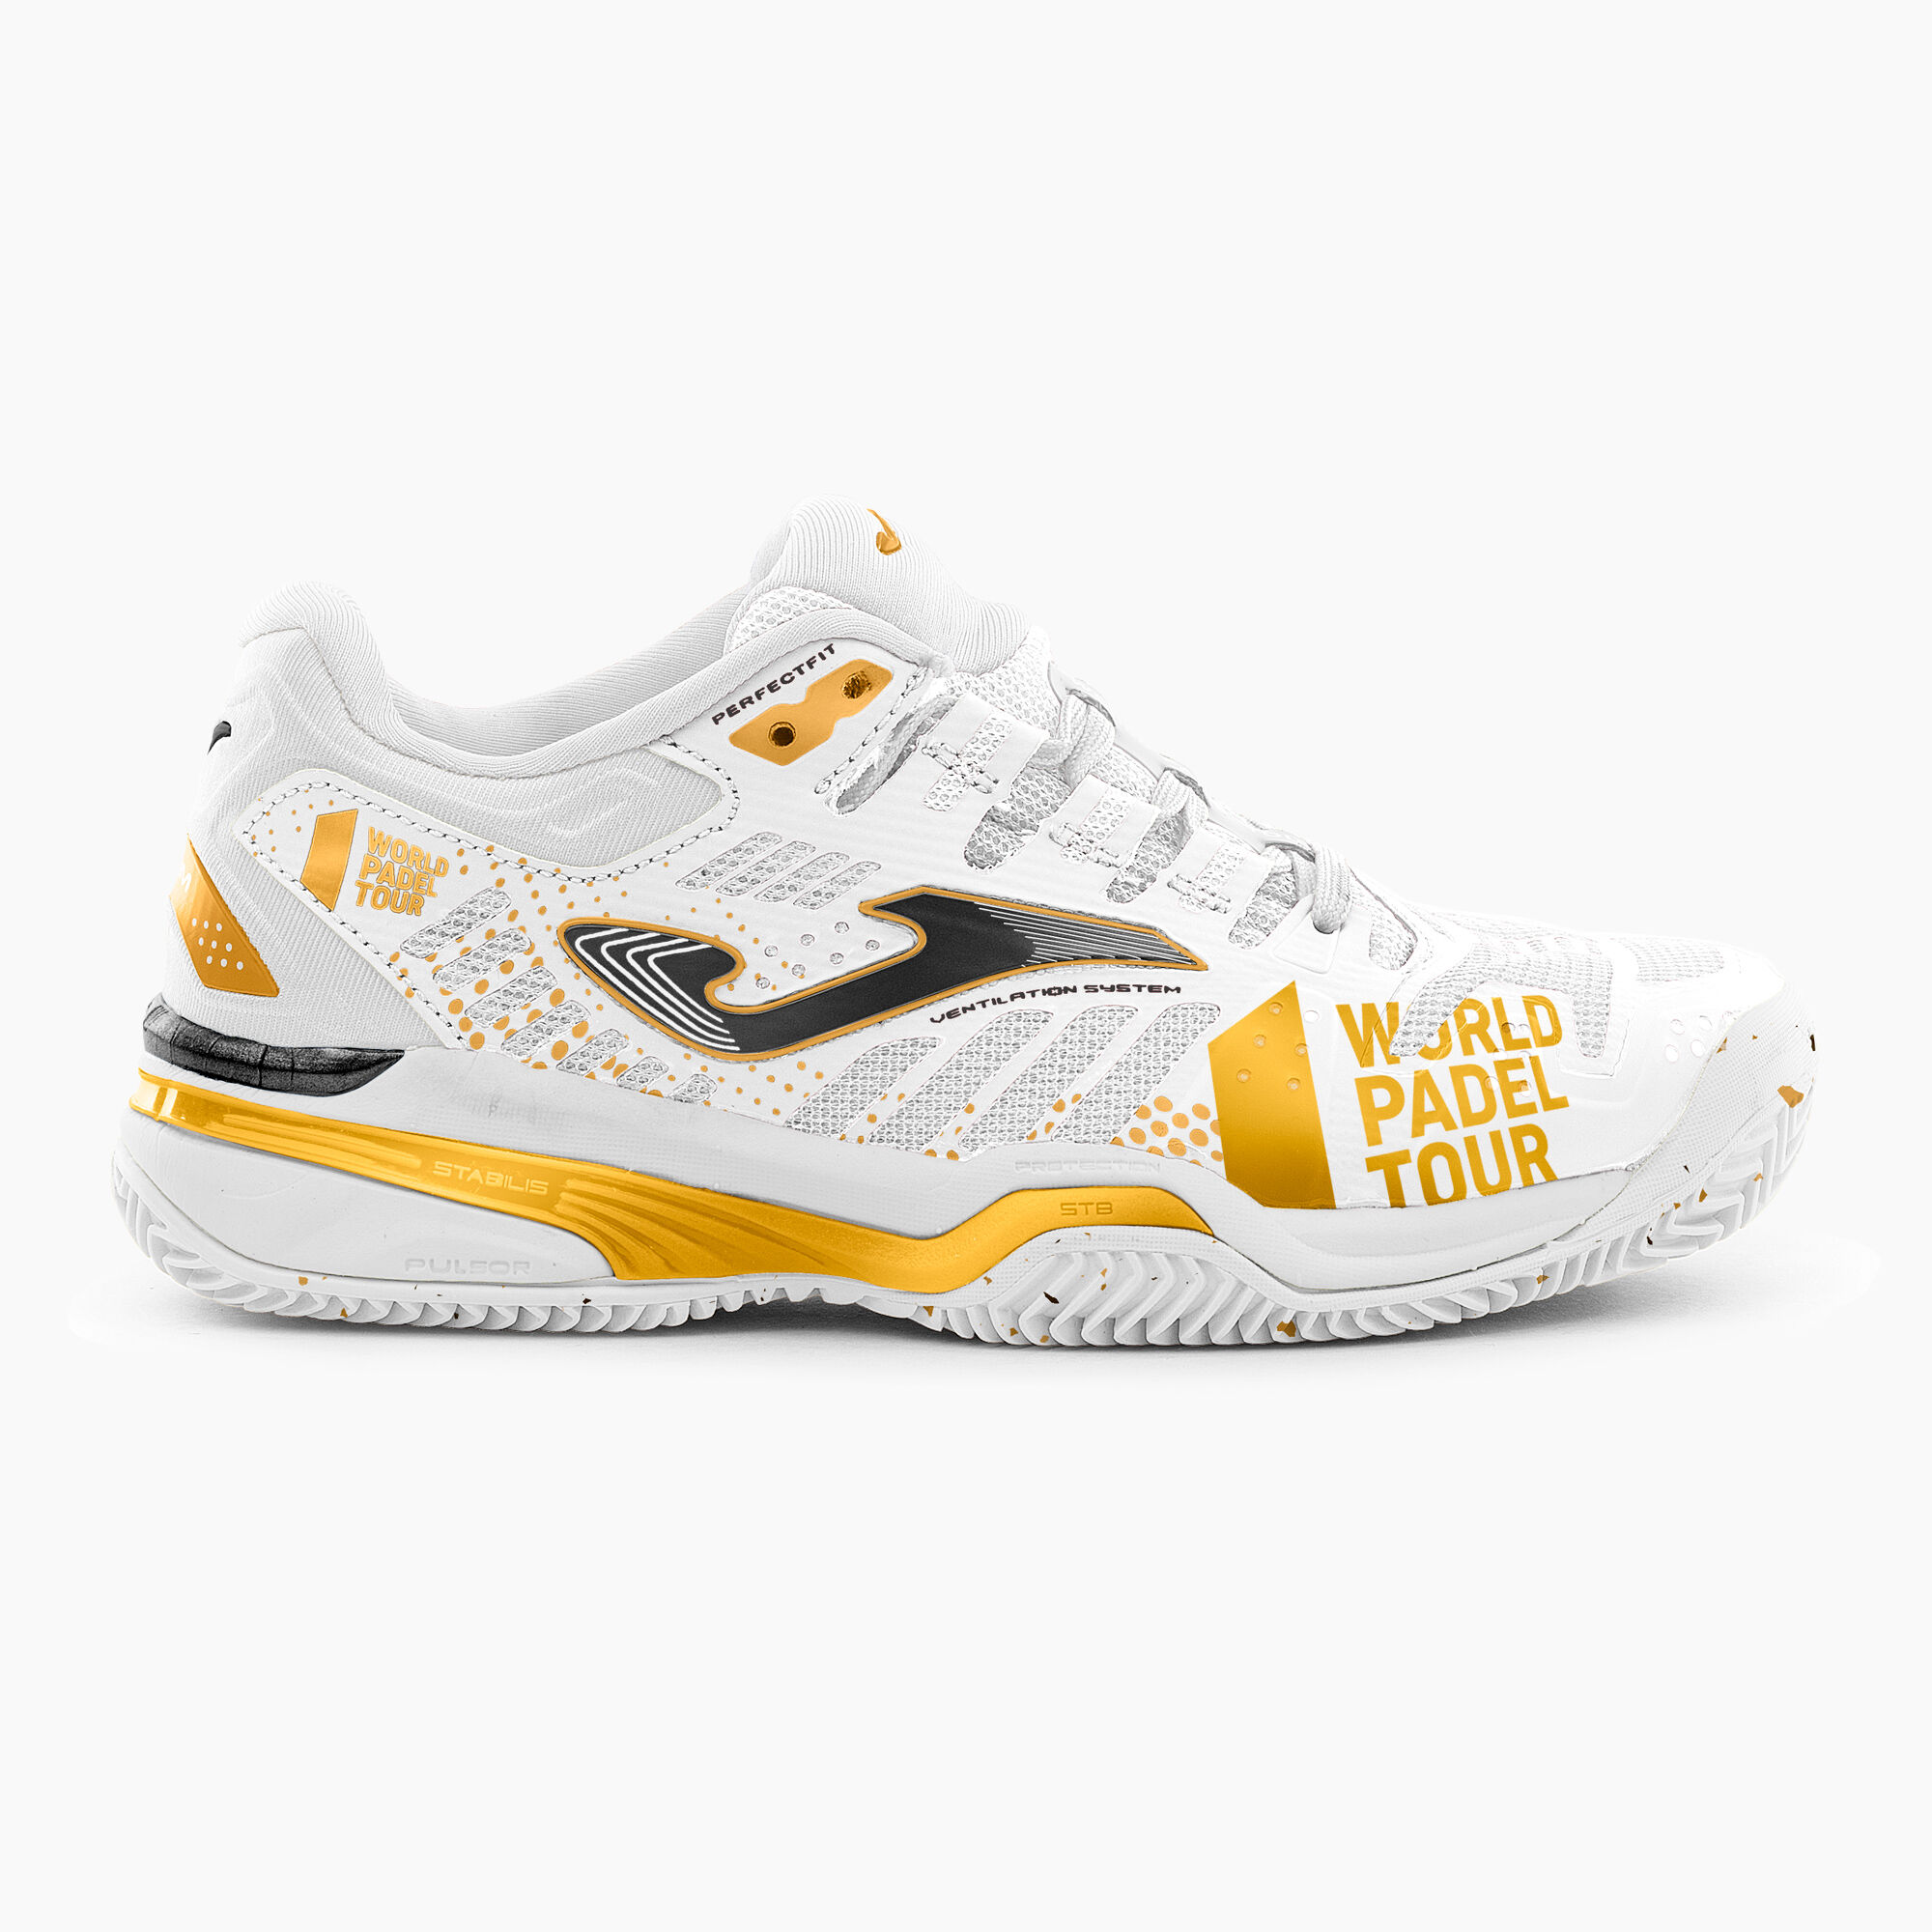 SHOES SLAM 22 WORLD PADEL TOUR CLAY JUNIOR WHITE GOLD